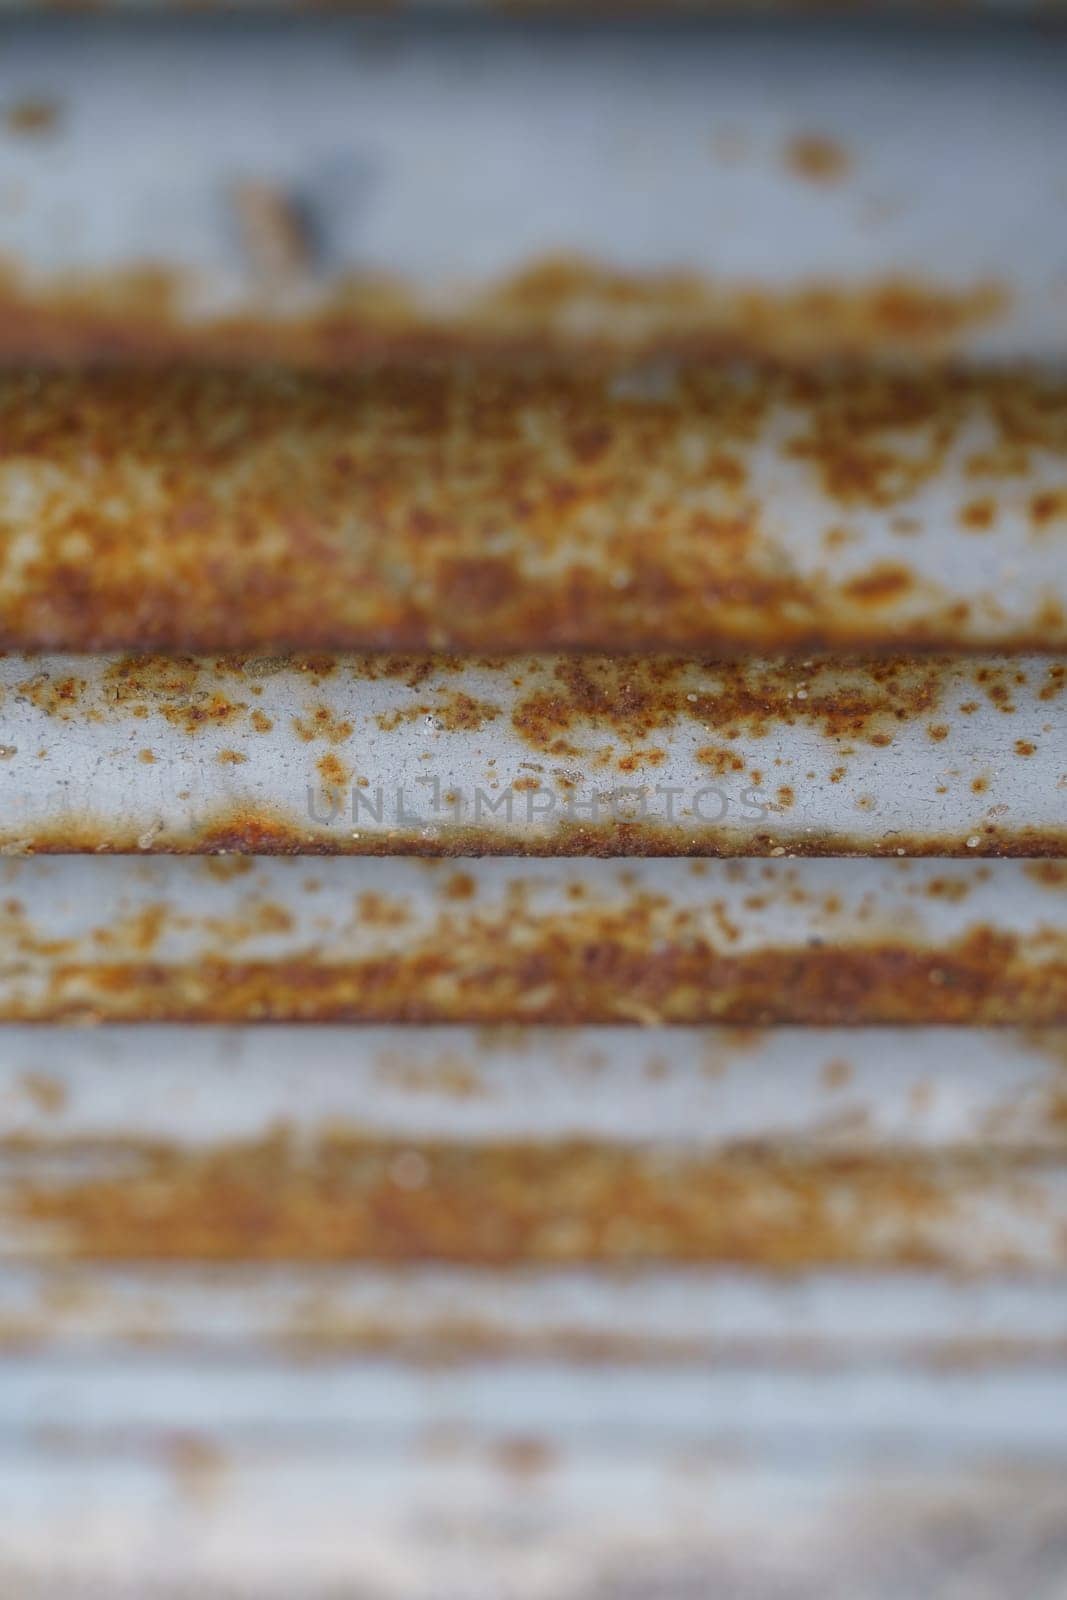 Macro shot of a weathered and rusted metal surface, showcasing intricate patterns and textures formed by oxidation.